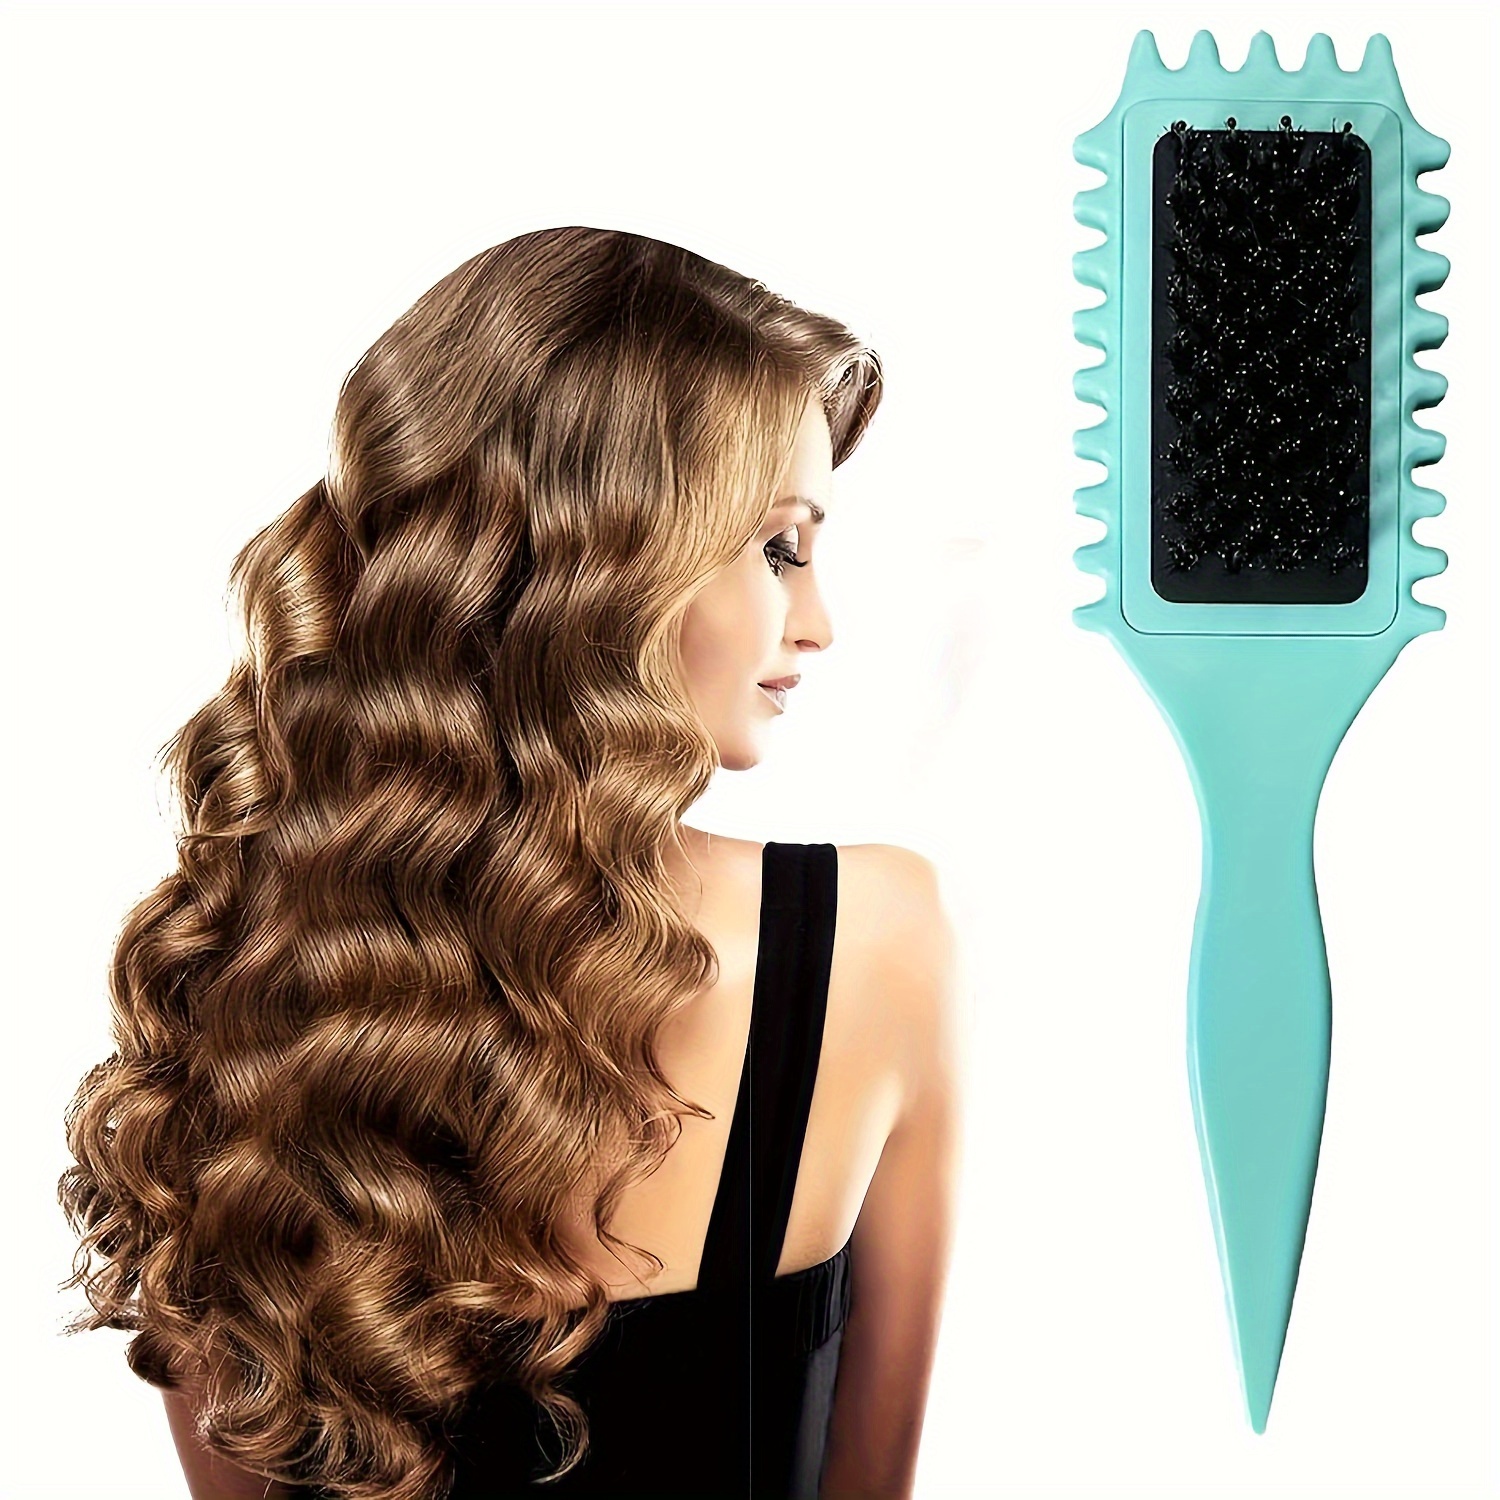 

Elastic Curling Comb Stick For Normal Hair - Mane Bristle Material - Enhancer Styling Brush For Men And Women - Defines, Shapes, And Separates Curls With Reduced Pulling - 1pc 2024 Upgraded Version